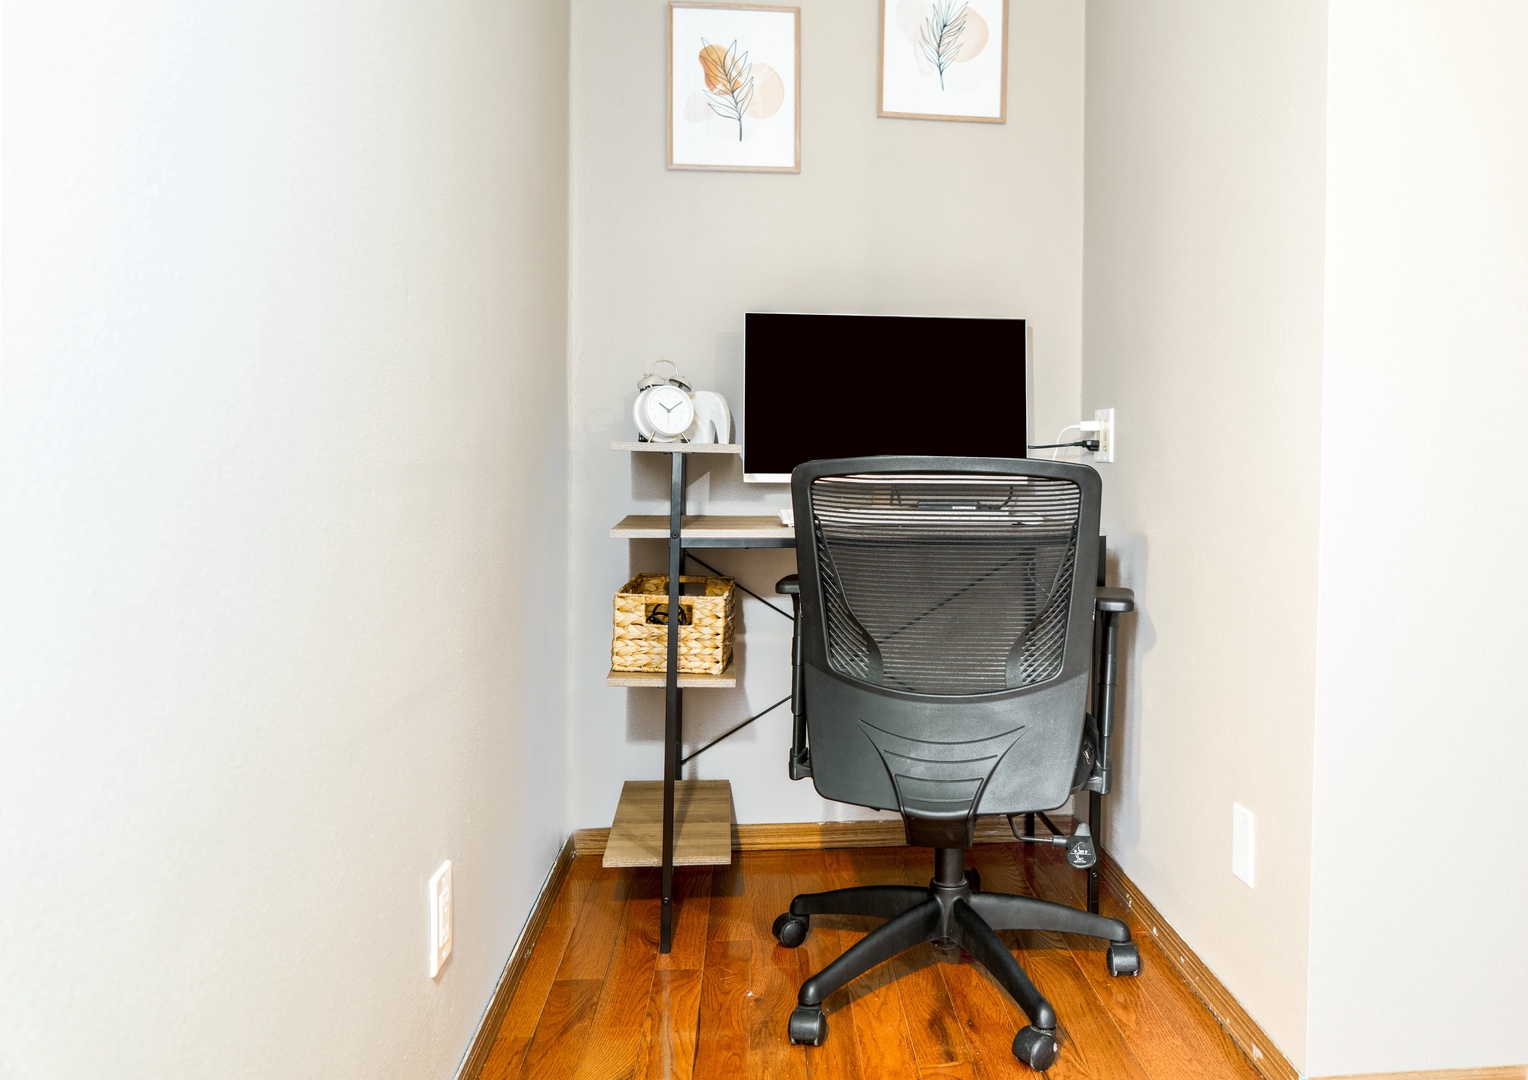 Enjoy relaxation in the second living room, complete with a workspace area